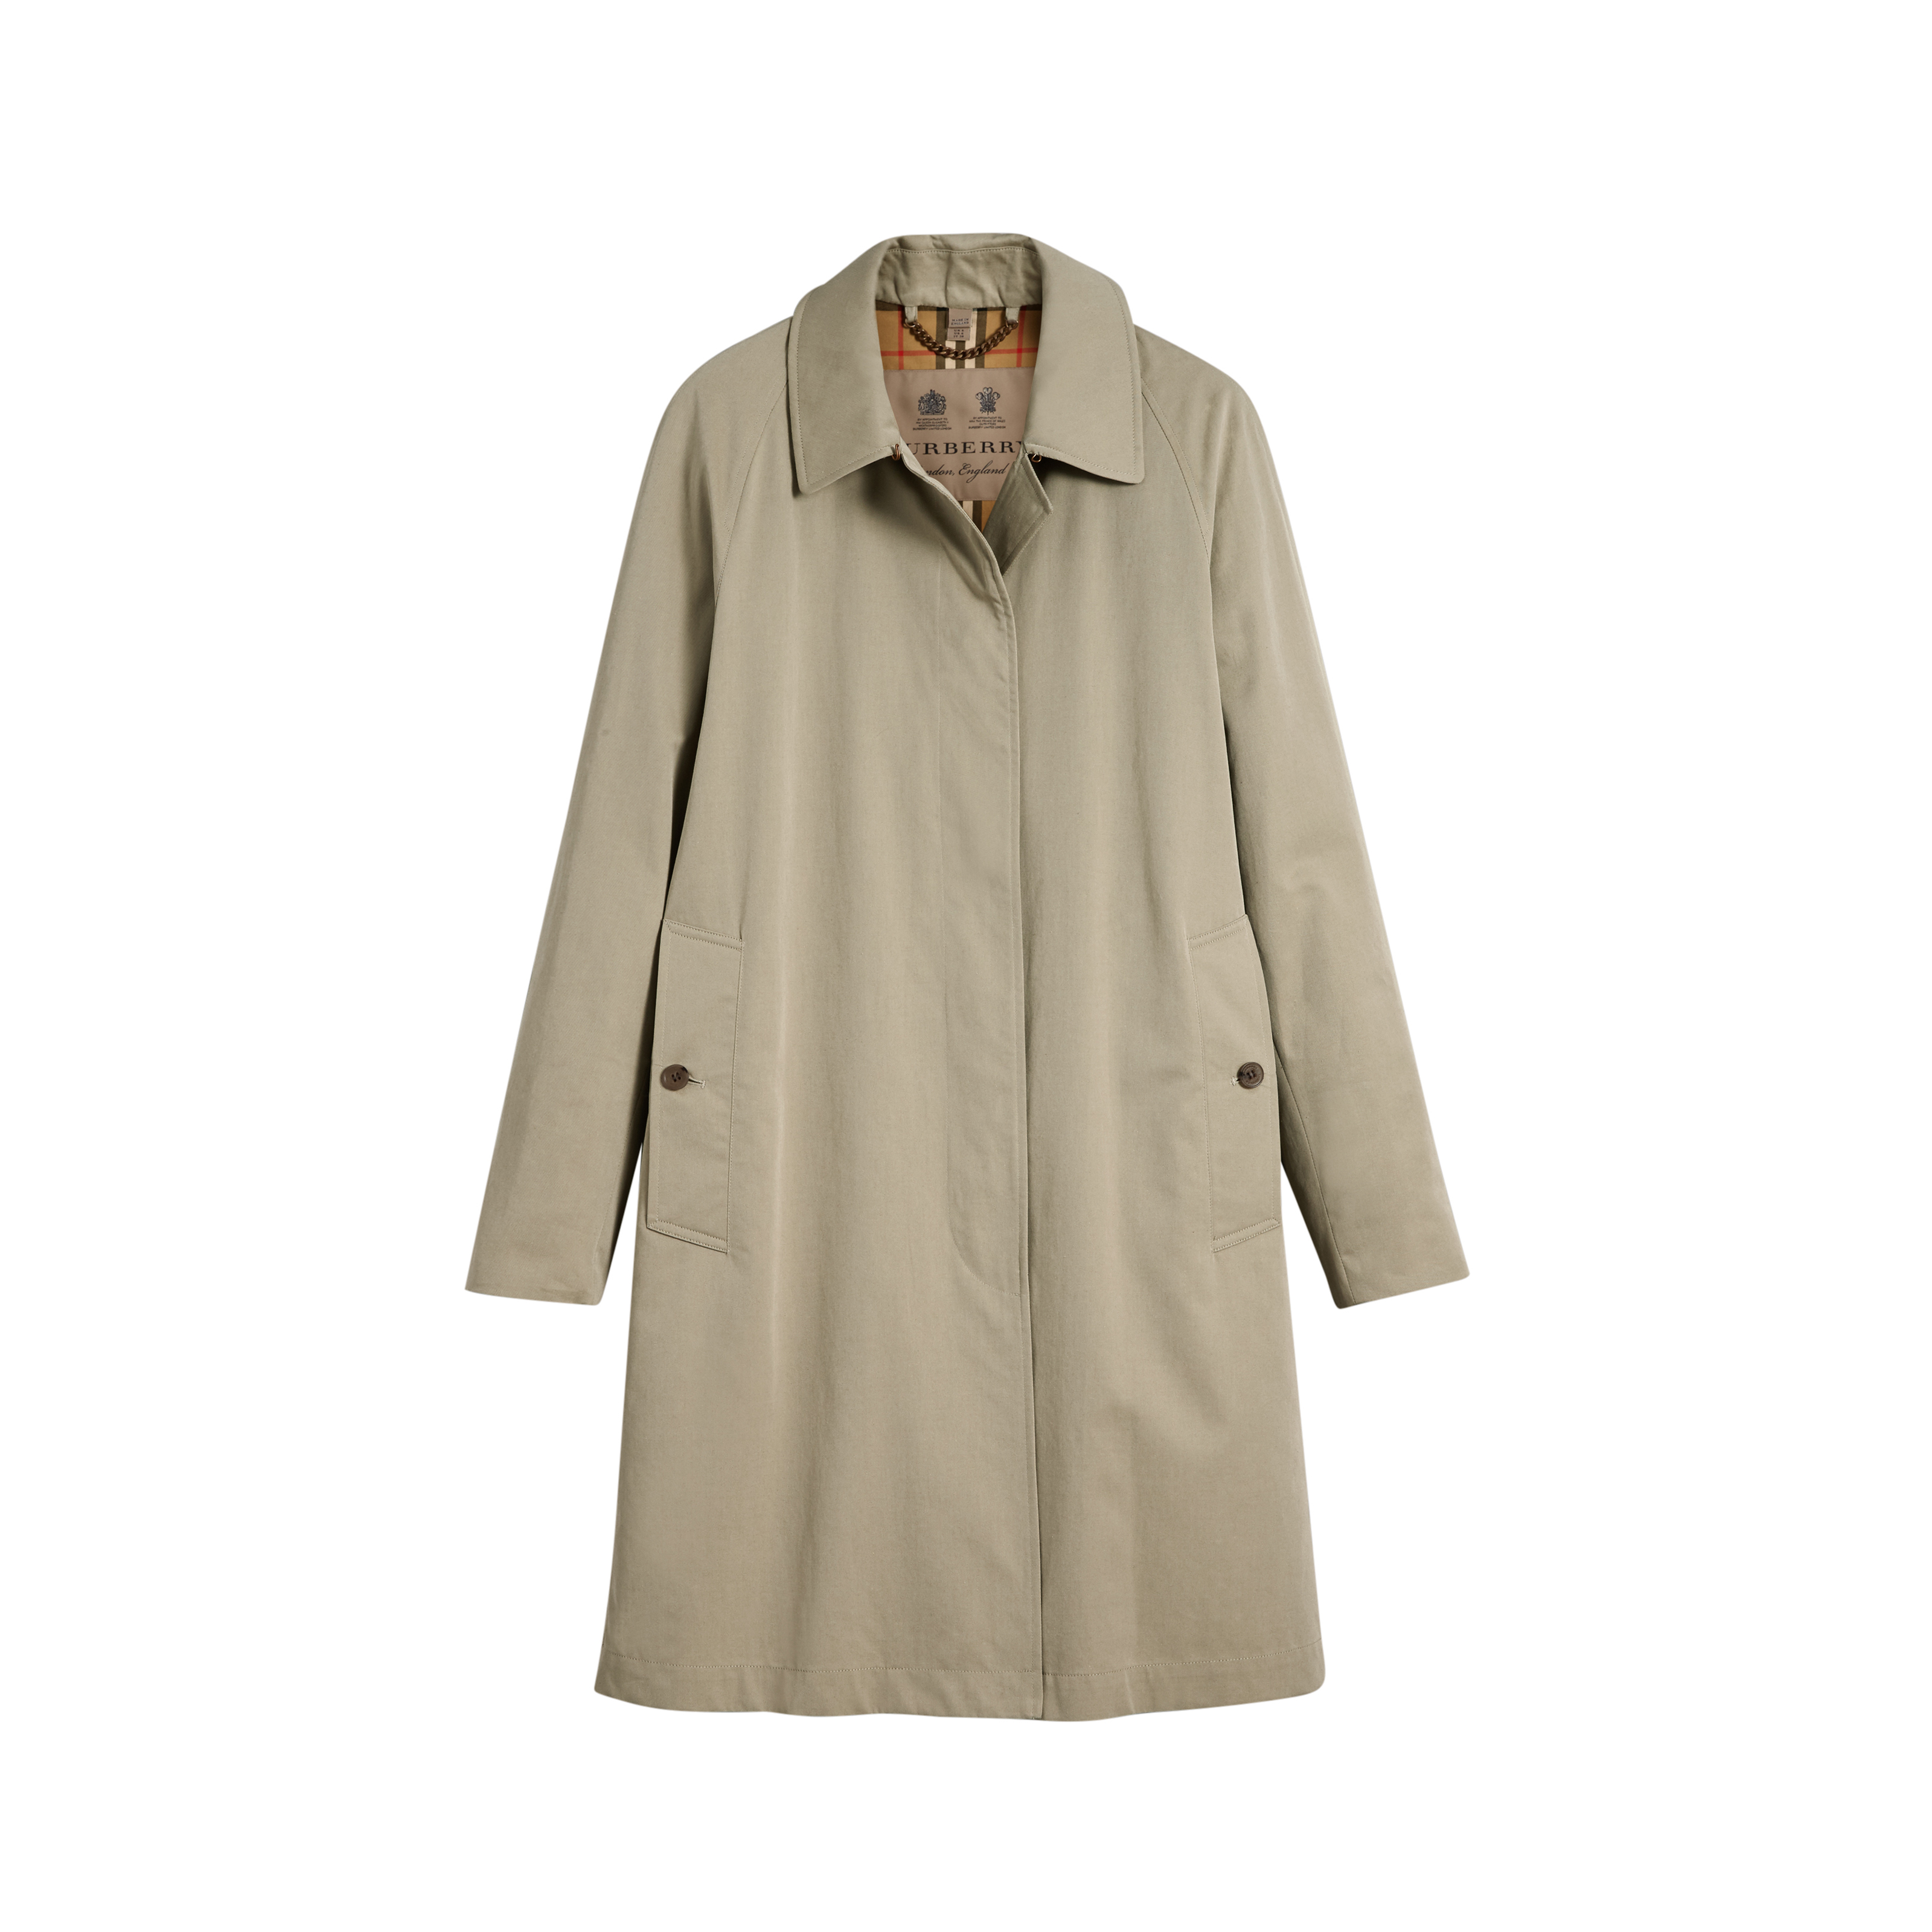 WANTED: THE BURBERRY CAR COAT | What We Adore